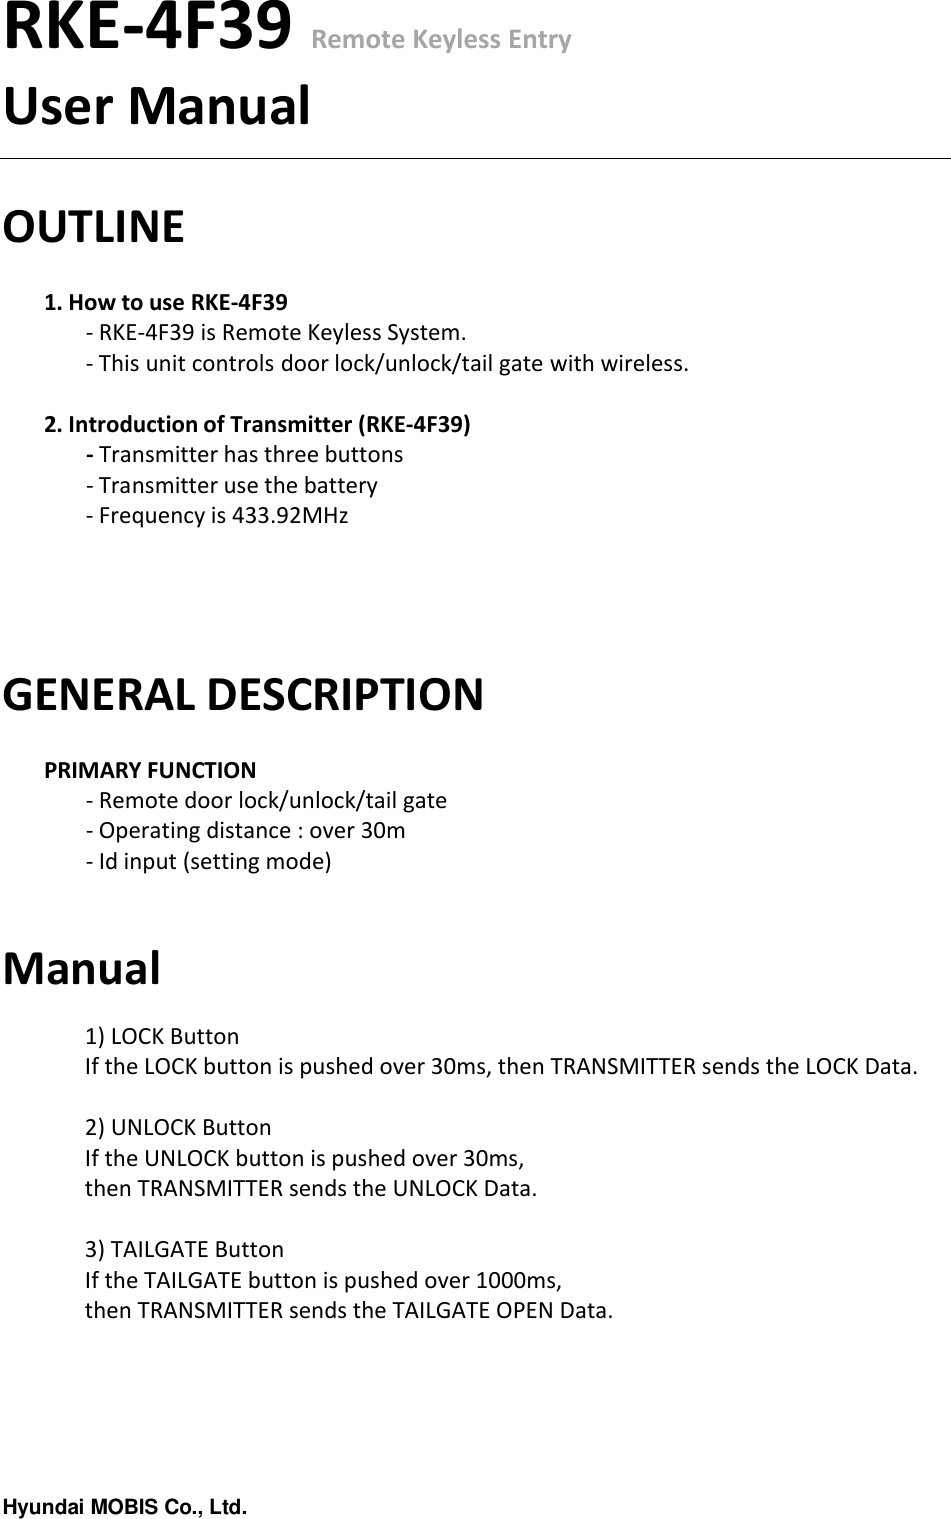 Hyundai MOBIS Co., Ltd.RKE-4F39 Remote Keyless EntryUser ManualOUTLINE1. How to use RKE-4F39- RKE-4F39 is Remote Keyless System.- This unit controls door lock/unlock/tail gate with wireless.2. Introduction of Transmitter (RKE-4F39)- Transmitter has three buttons- Transmitter use the battery- Frequency is 433.92MHzGENERAL DESCRIPTIONPRIMARY FUNCTION- Remote door lock/unlock/tail gate - Operating distance : over 30m - Id input (setting mode)Manual1) LOCK ButtonIf the LOCK button is pushed over 30ms, then TRANSMITTER sends the LOCK Data.2) UNLOCK ButtonIf the UNLOCK button is pushed over 30ms, then TRANSMITTER sends the UNLOCK Data.3) TAILGATE ButtonIf the TAILGATE button is pushed over 1000ms, then TRANSMITTER sends the TAILGATE OPEN Data.